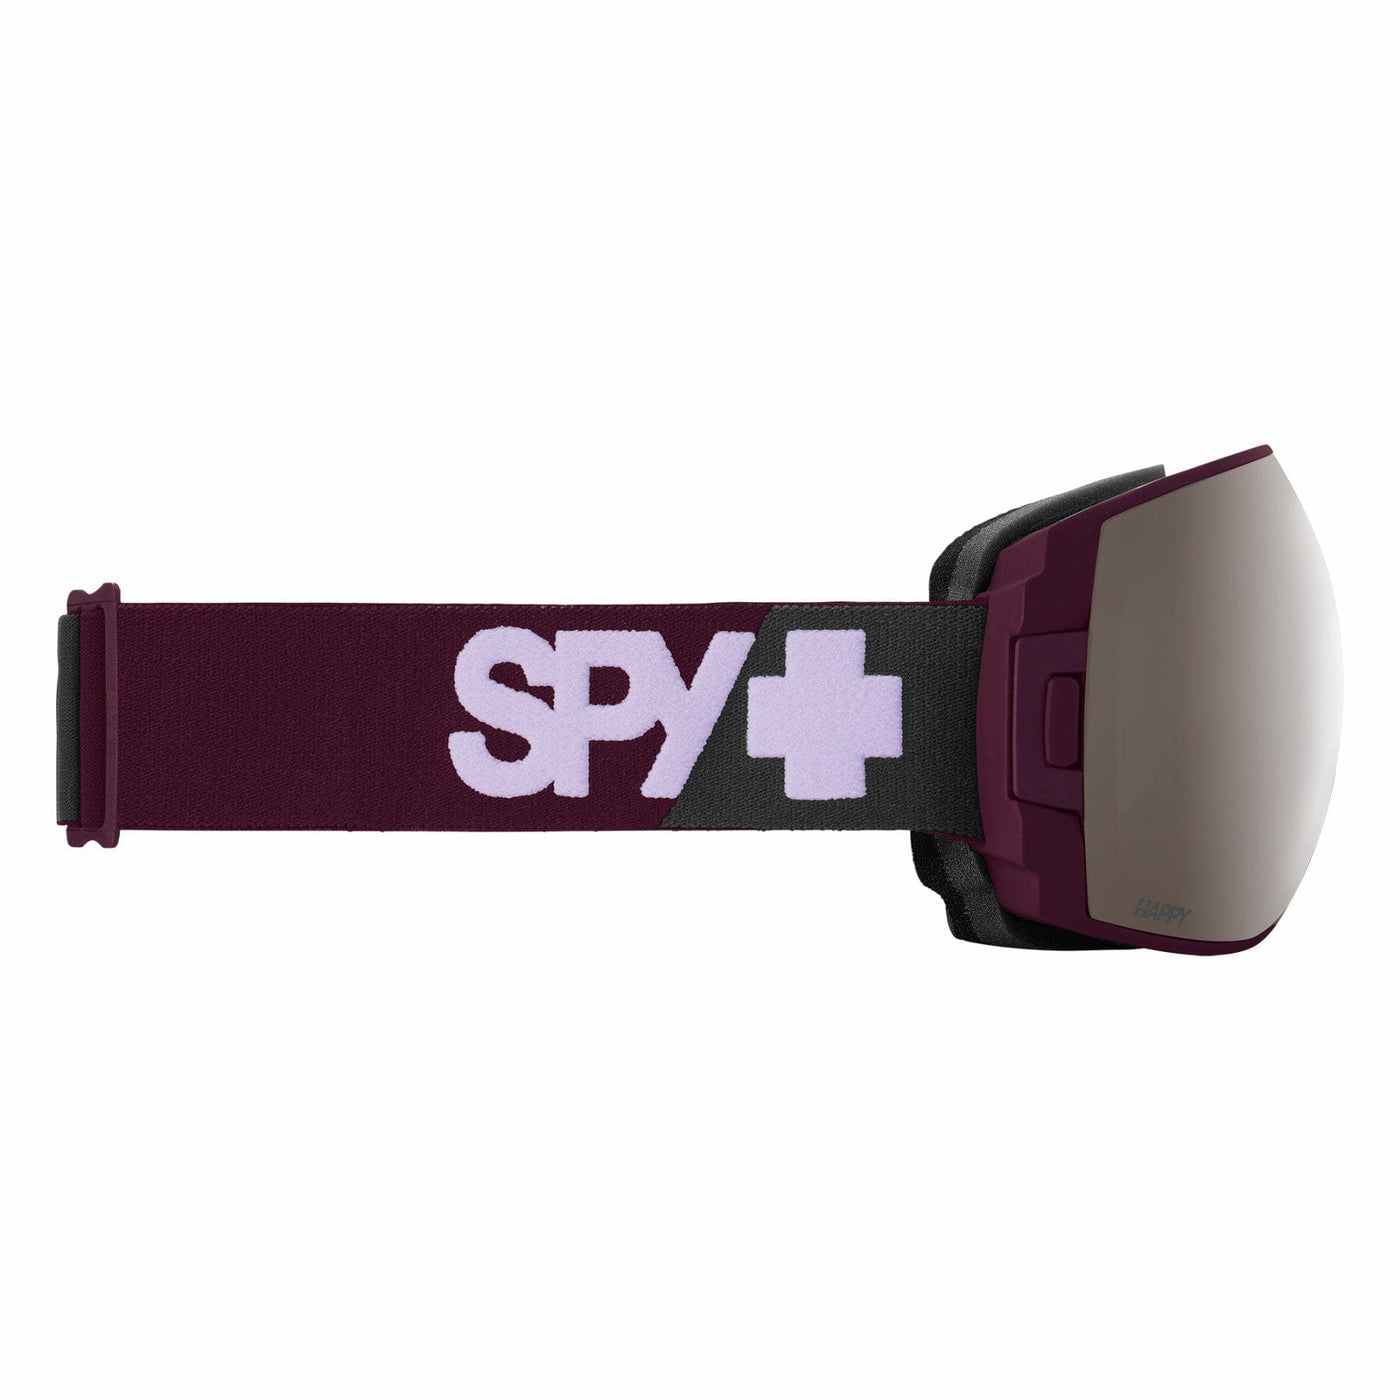 SPY Legacy SE Merlot Silver Snow Goggles 8Lines Shop - Fast Shipping